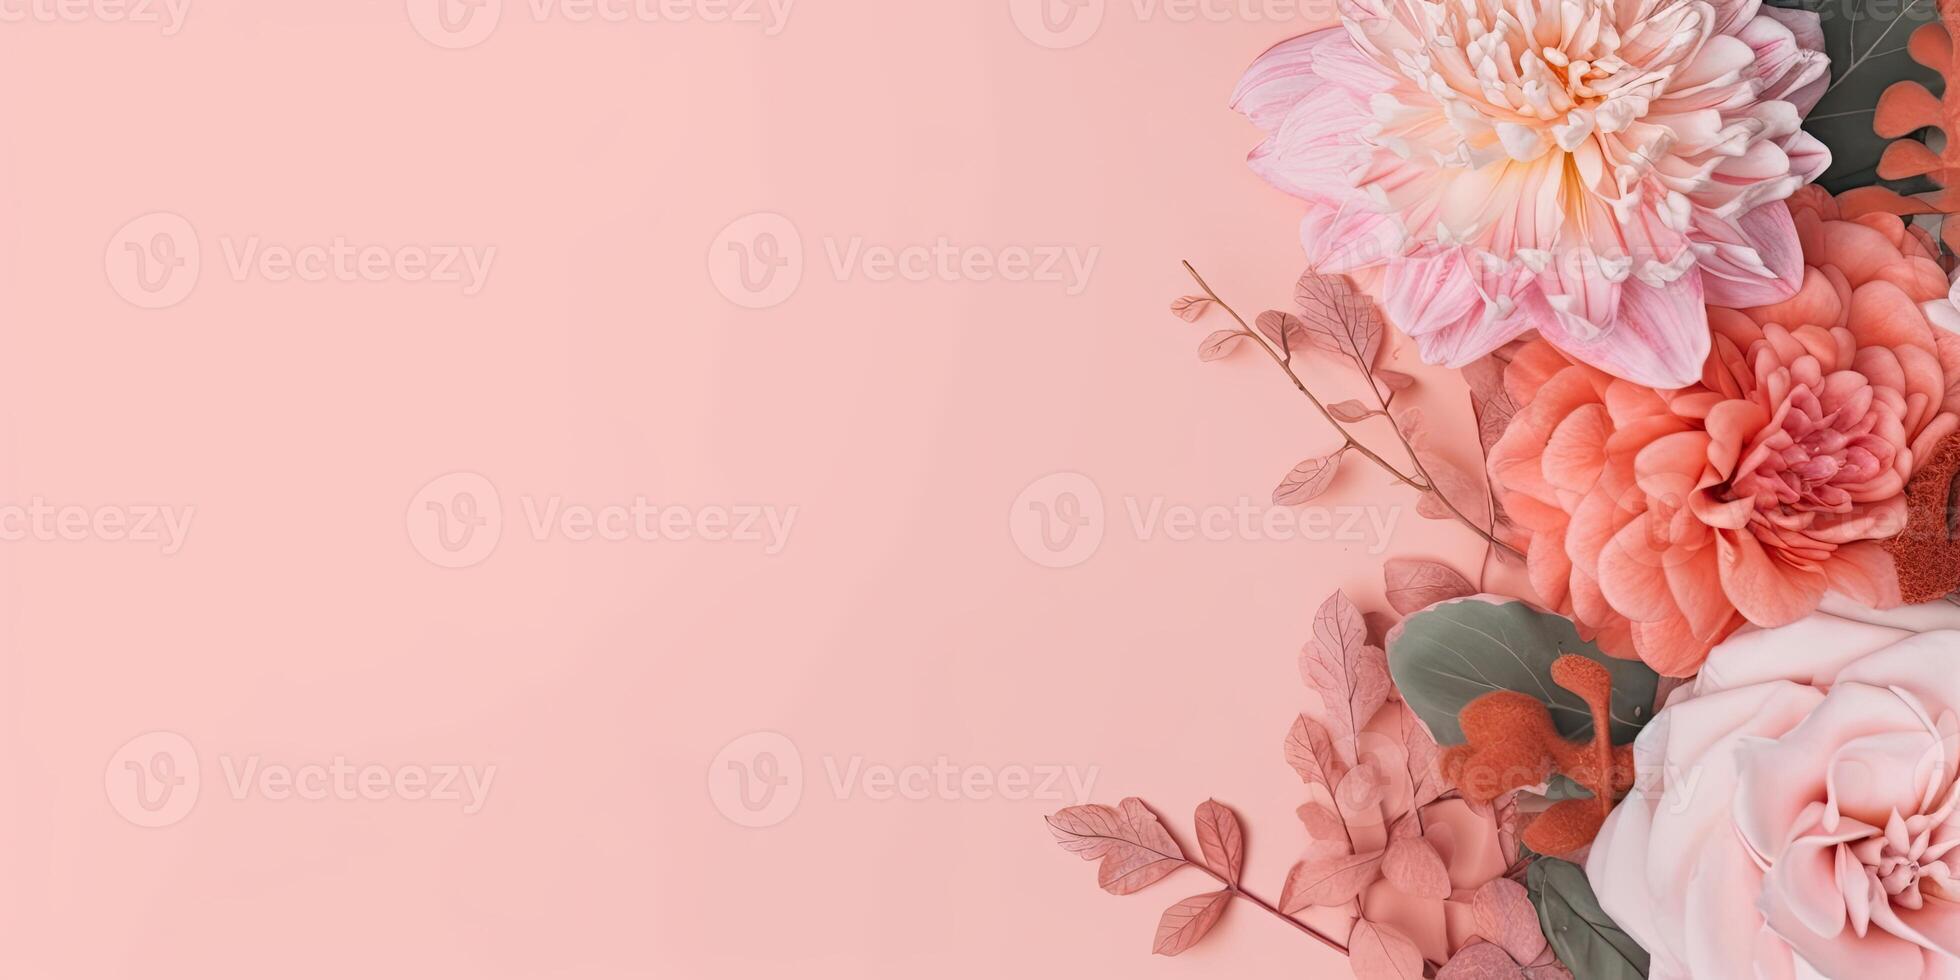 Flower setup on a solid background, with copy space, photo